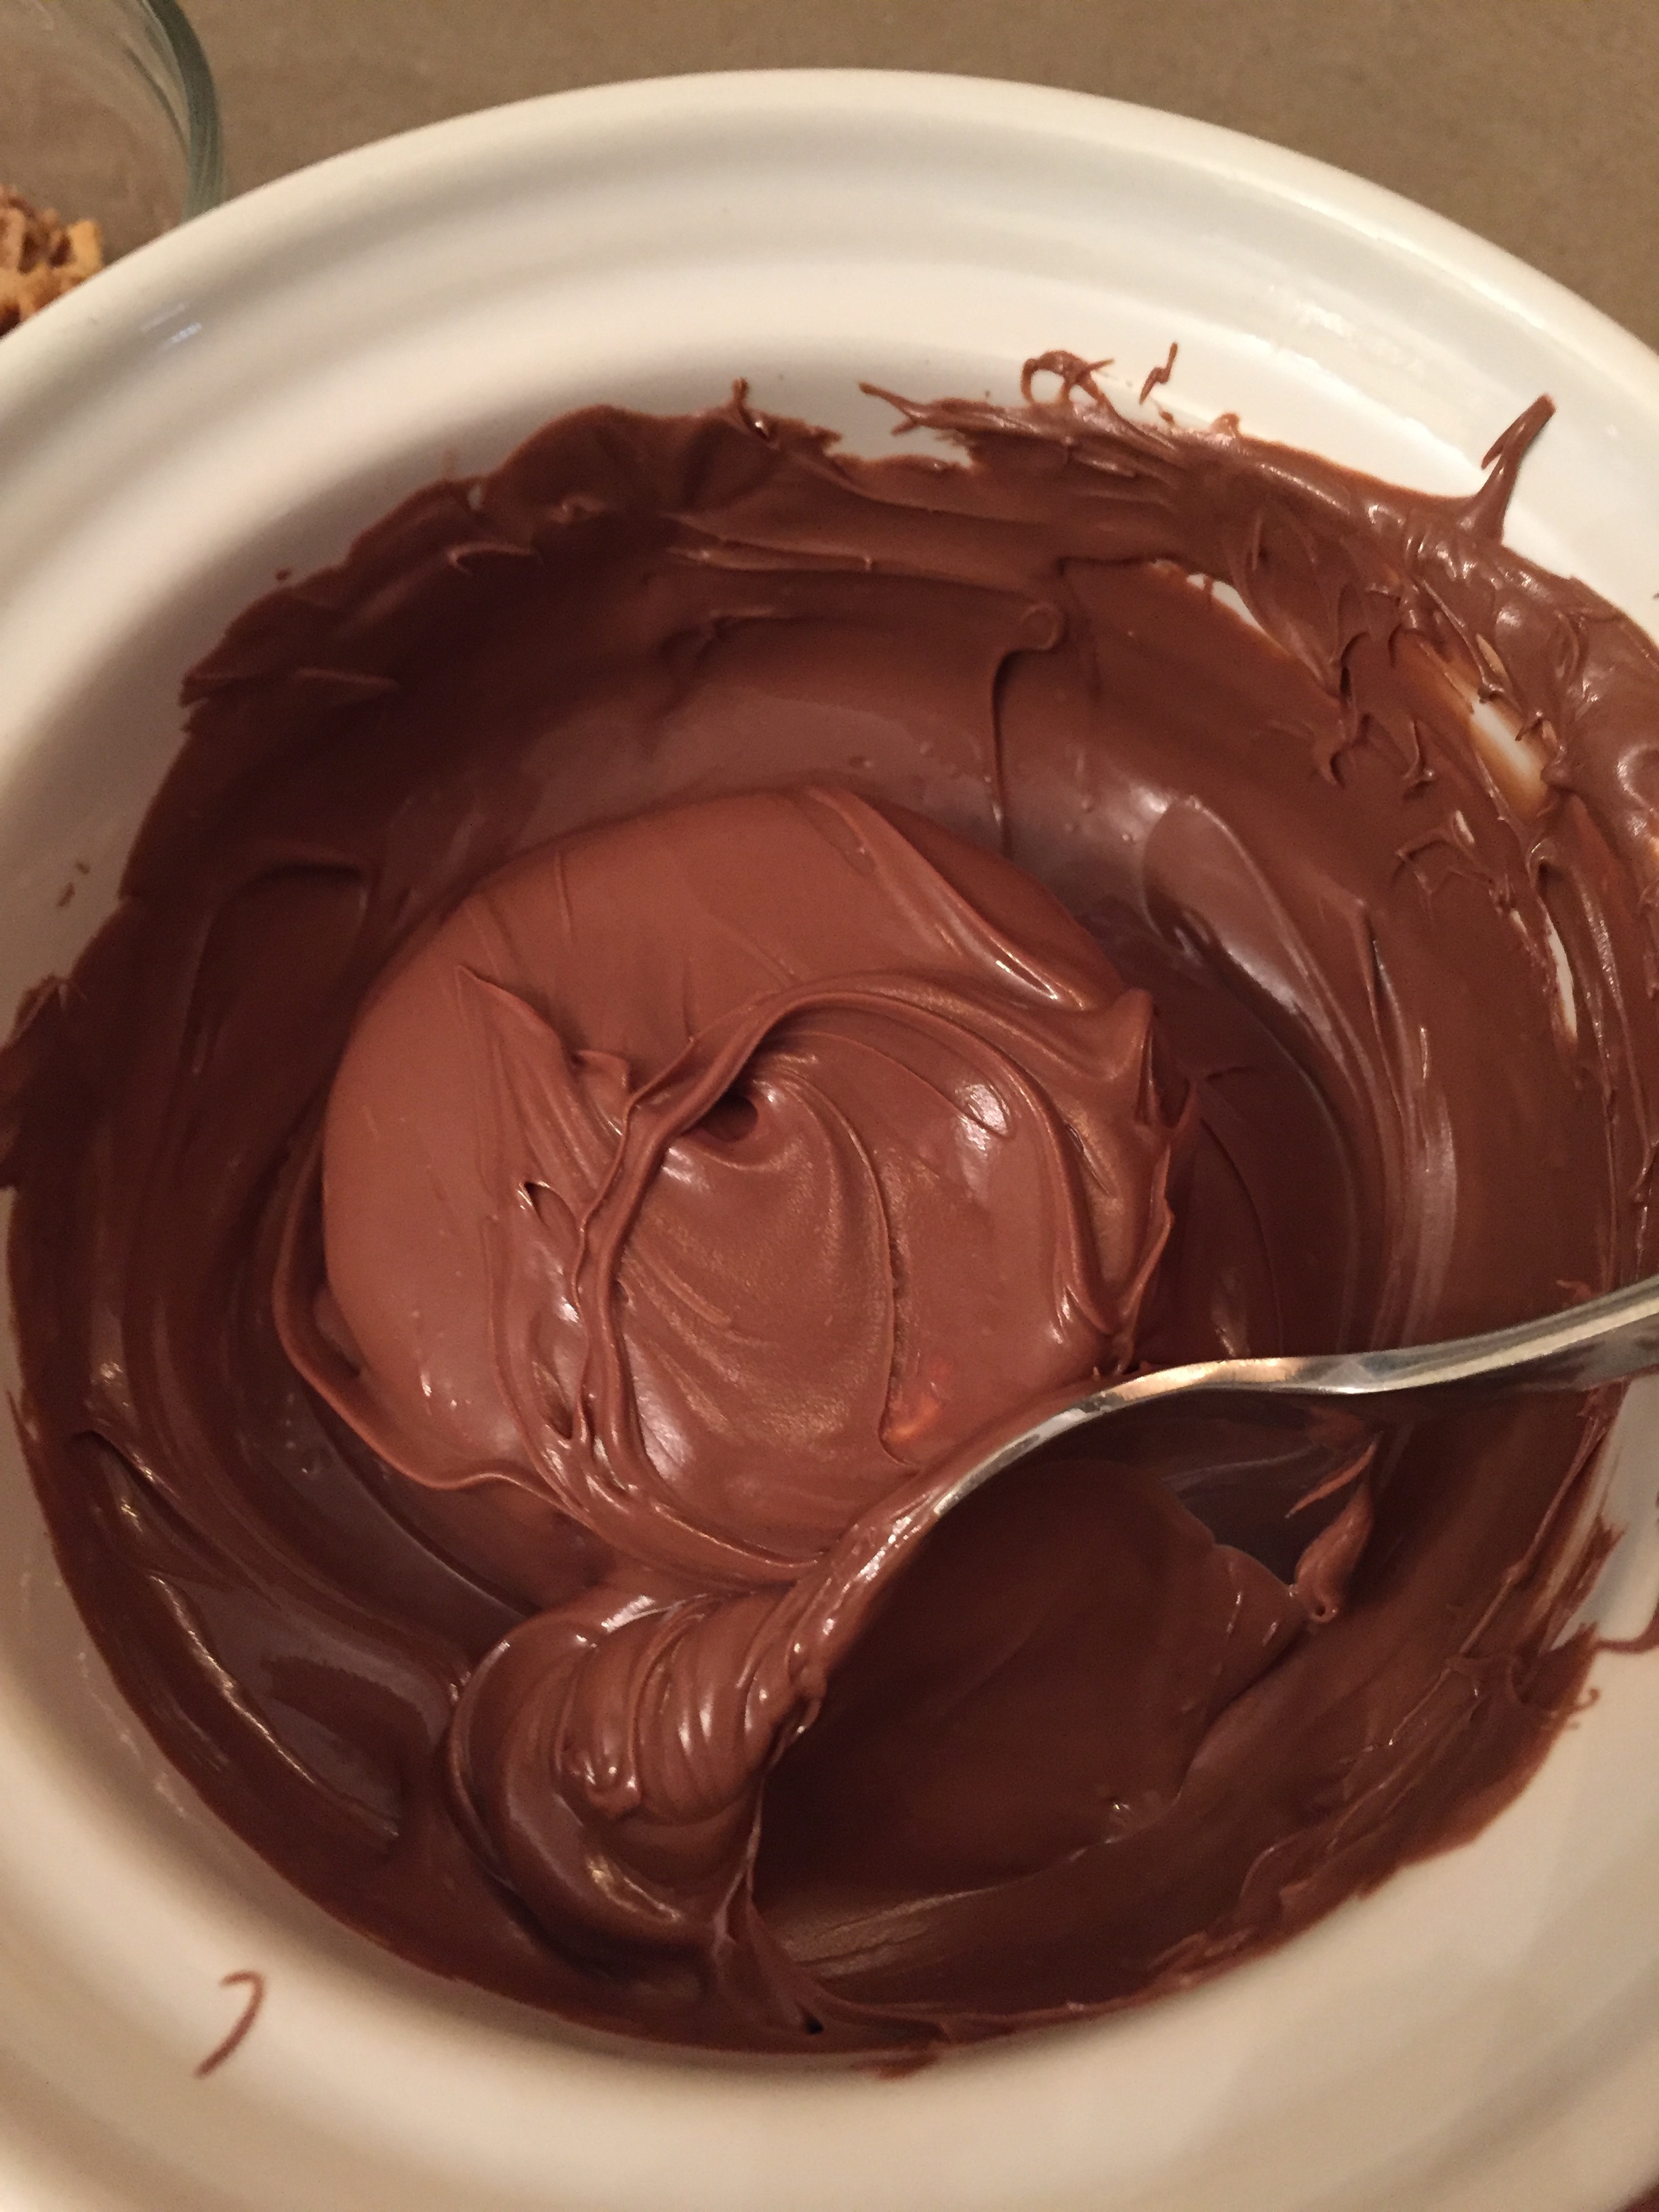 coating in chocolate